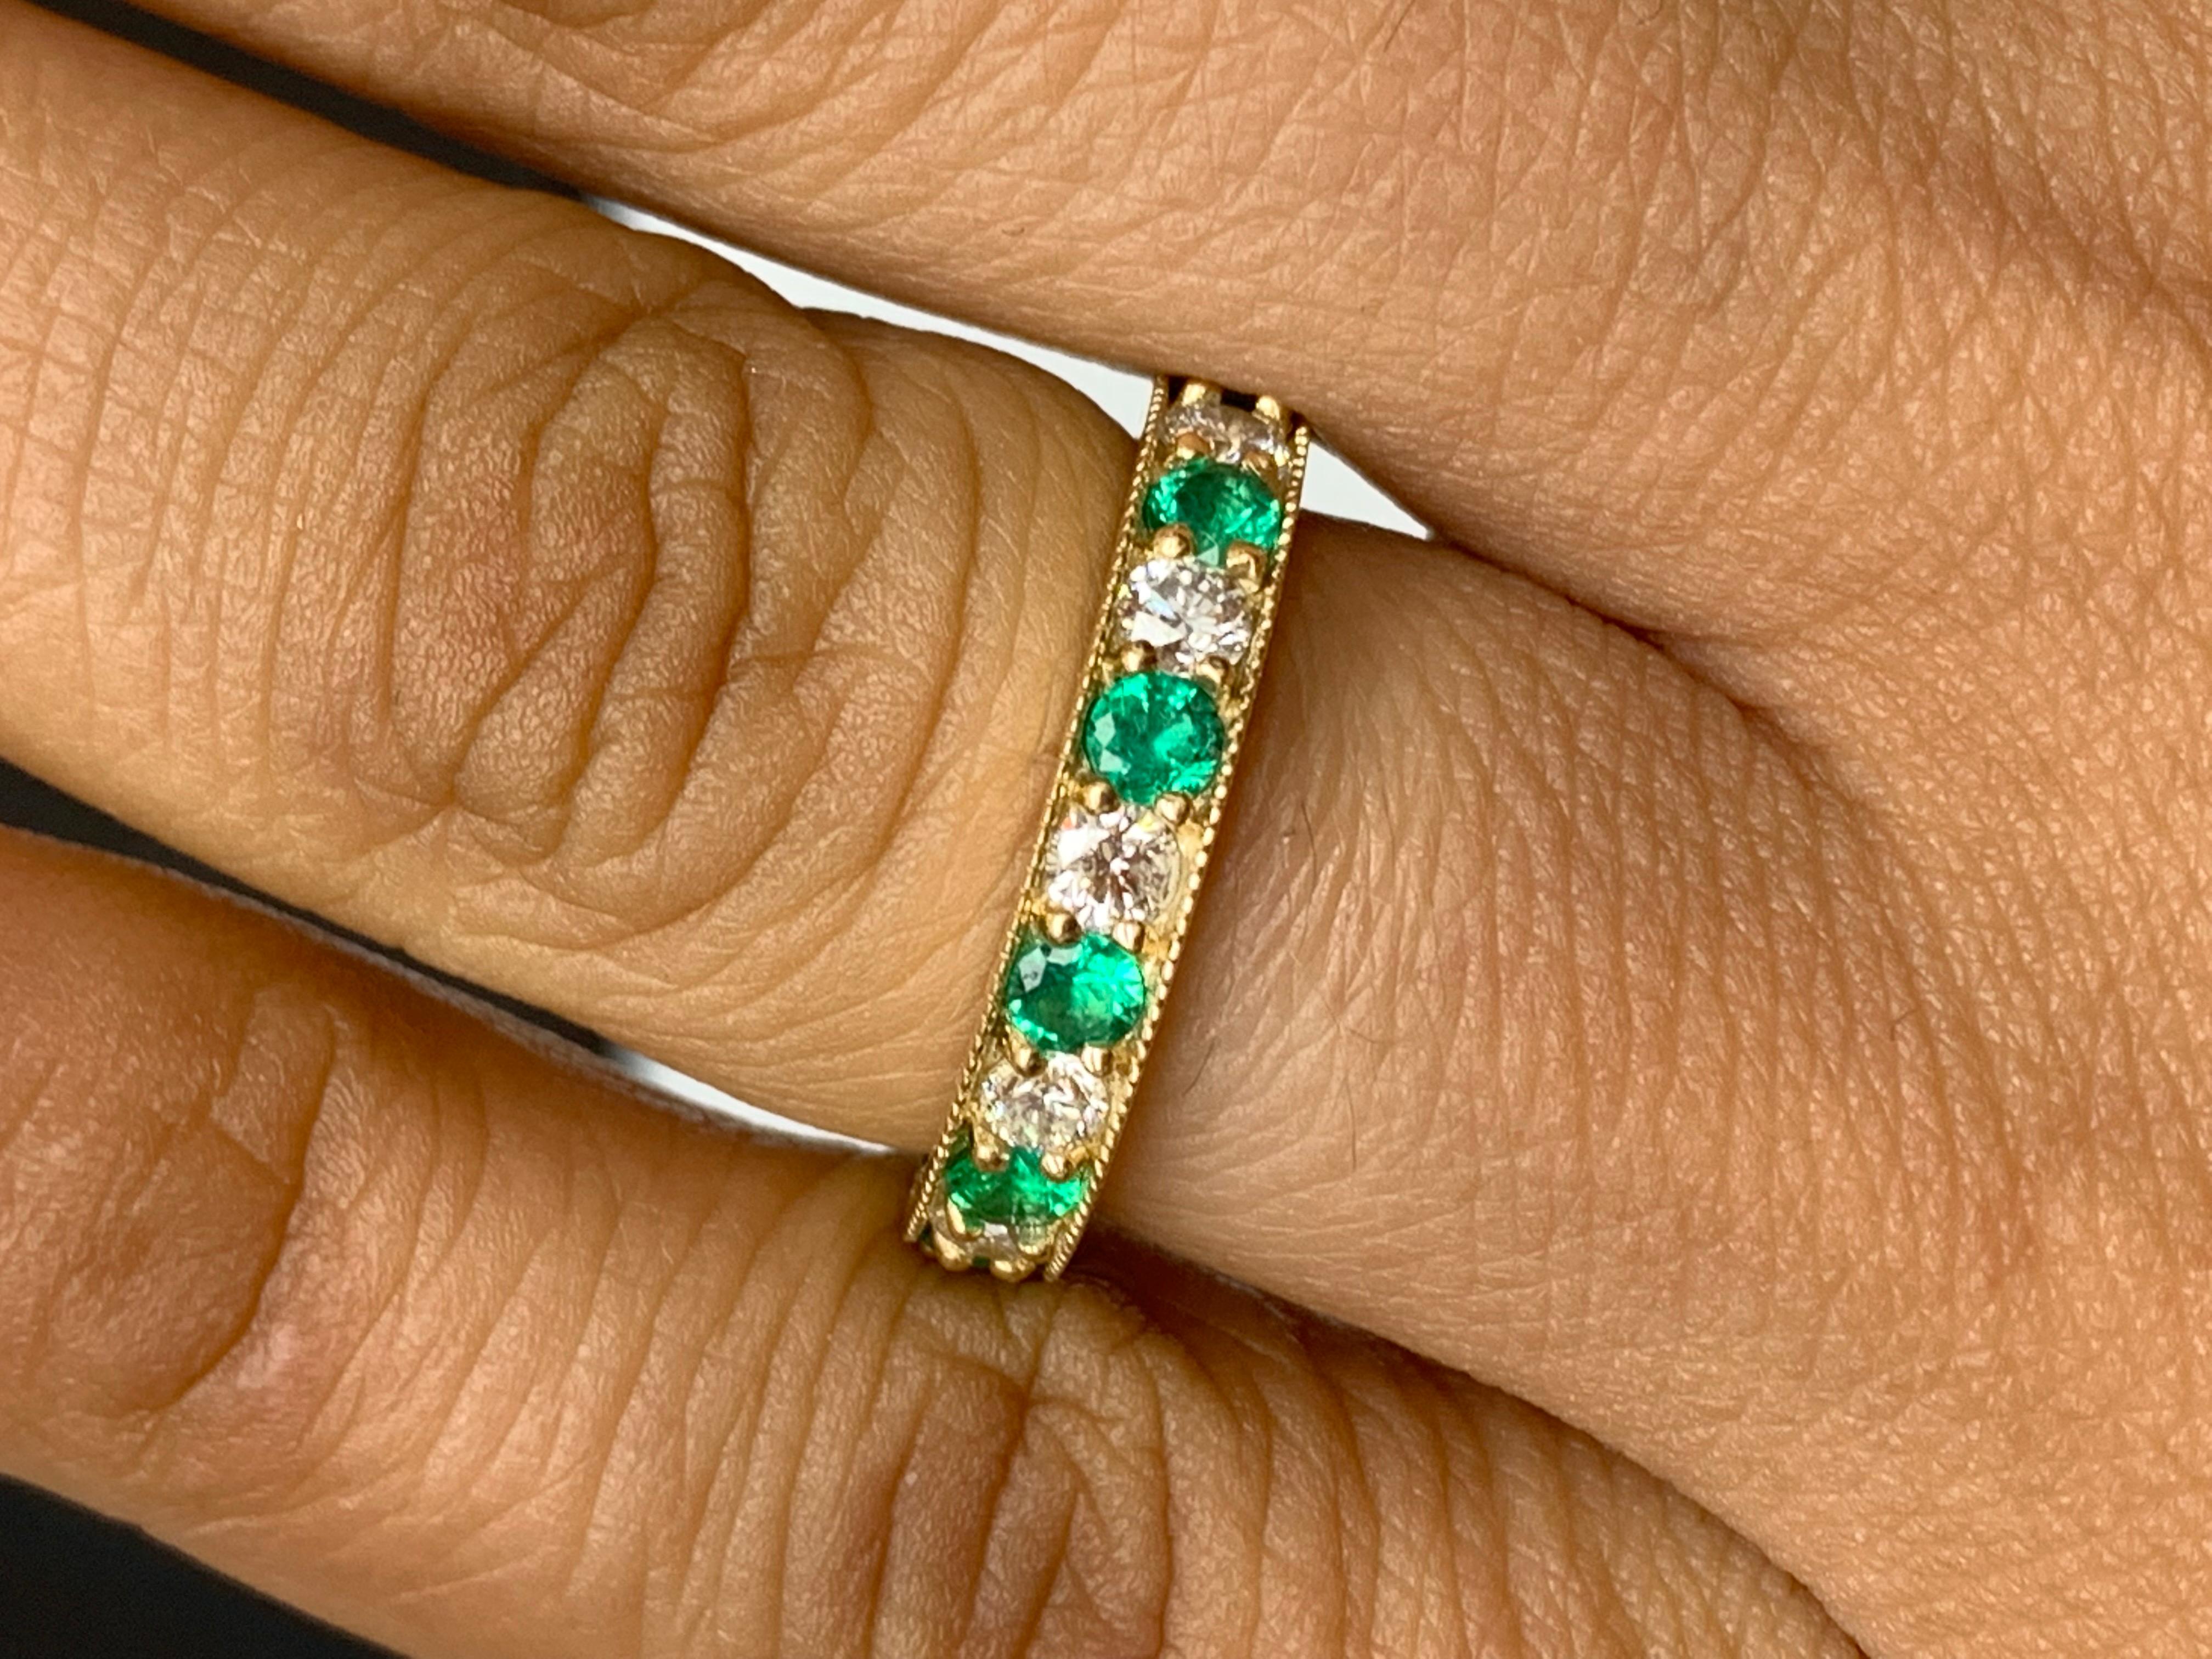 Handcrafted to perfection; showcasing color-rich brilliant-cut emeralds that elegantly alternate brilliant-cut diamonds in an 14k yellow gold setting. 
The 6 Emeralds weigh 0.55 carats total and 5 diamonds weigh 0.50 carats total.

Size 6.5 US